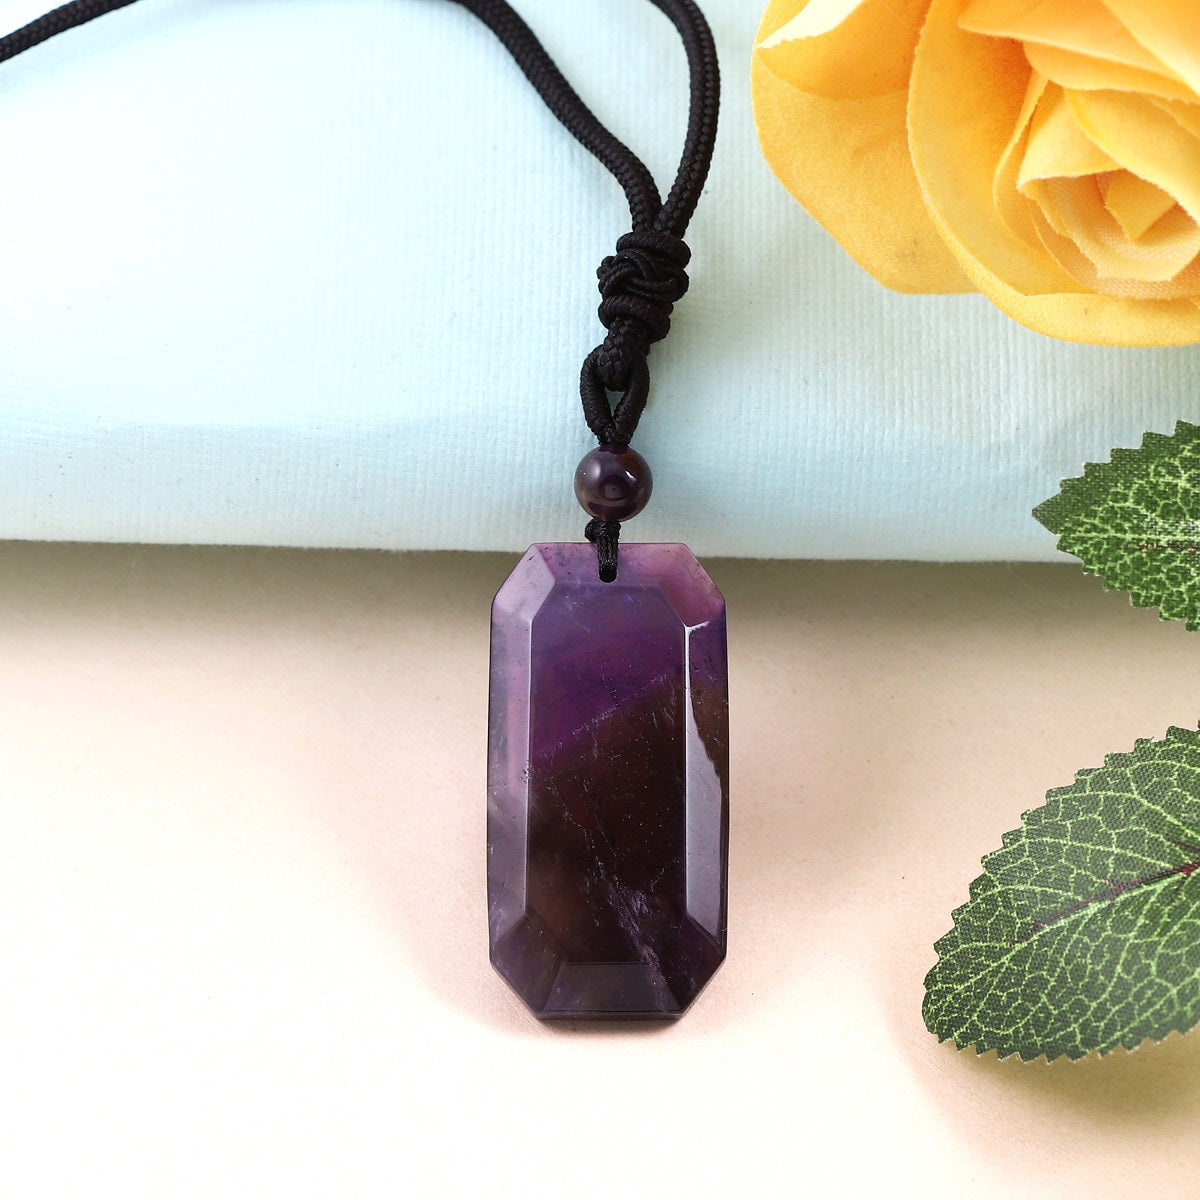 Top Plaza Healing Crystal Amethyst Black Obsidian Stone Necklace for Women  Men Hexagonal Pendant Necklaces Adjustable Rope Natural Gemstone Necklace  Jewelry Christmas Gift | Amazon.com